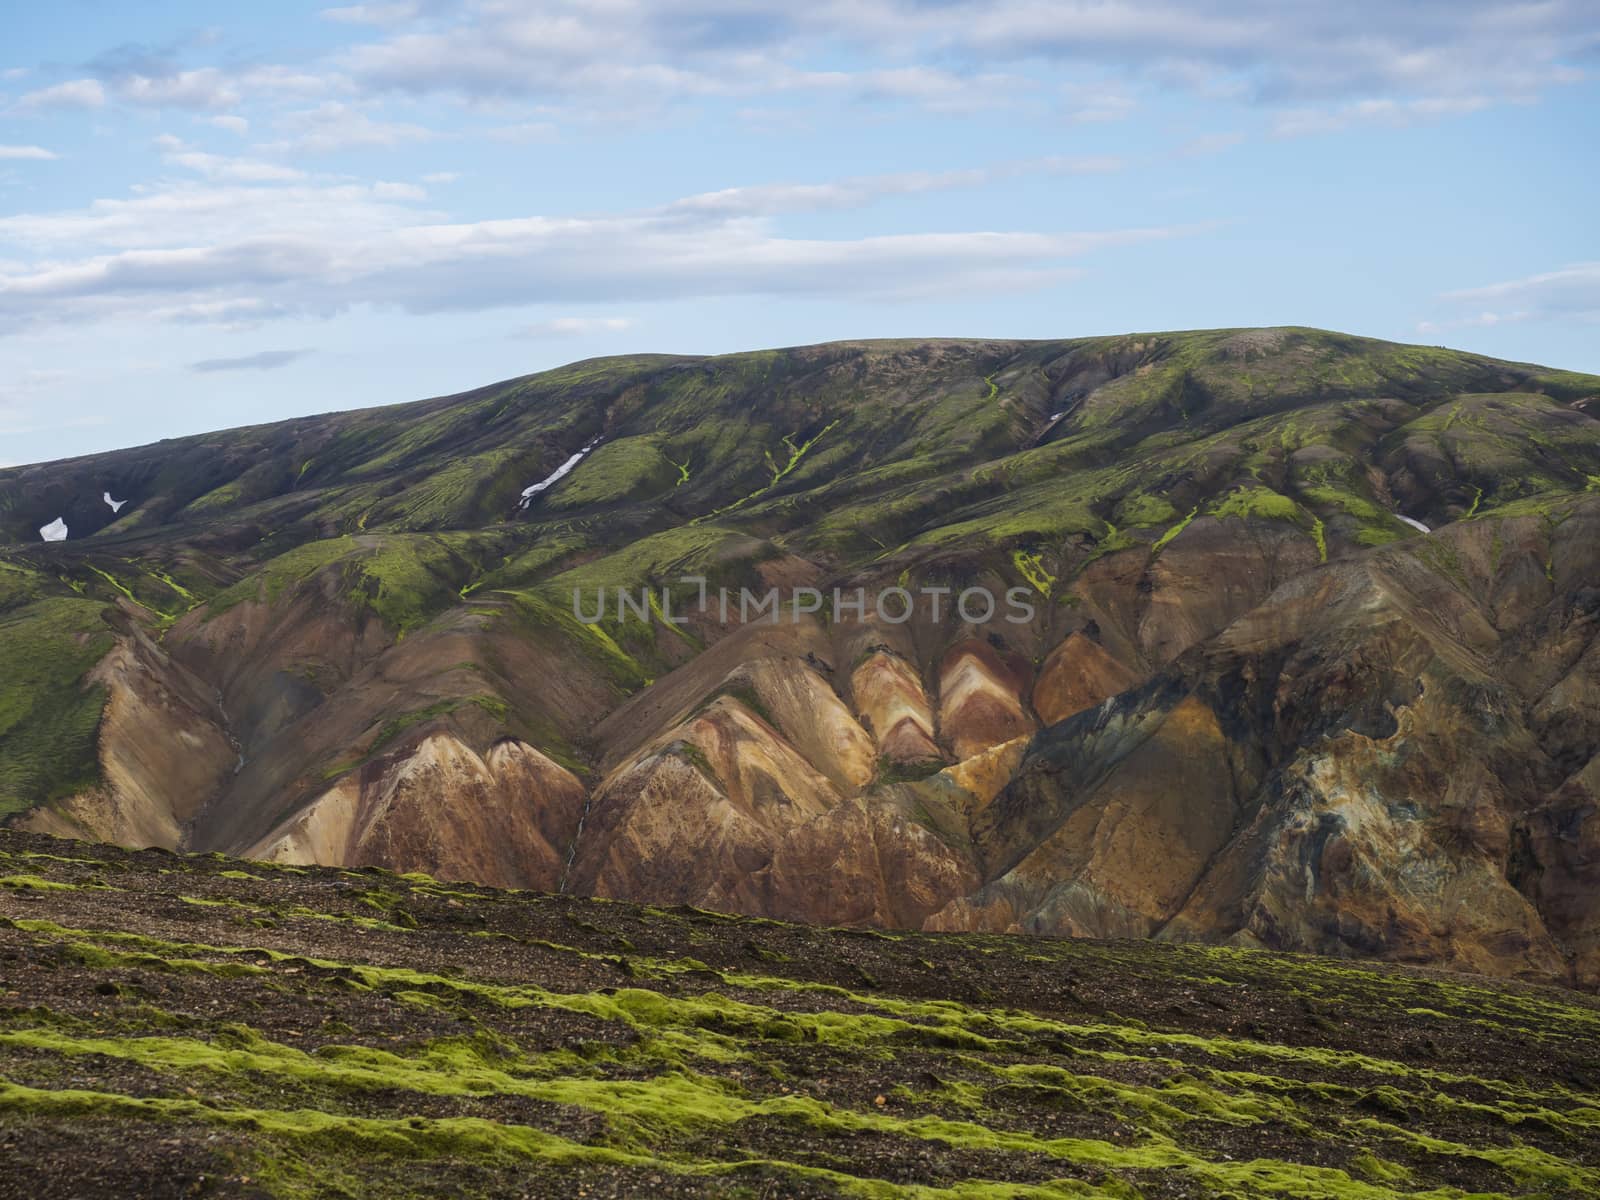 Colorful Rhyolit mountain panorma with multicolored volcanos in Landmannalaugar area of Fjallabak Nature Reserve in Highlands region of Iceland.